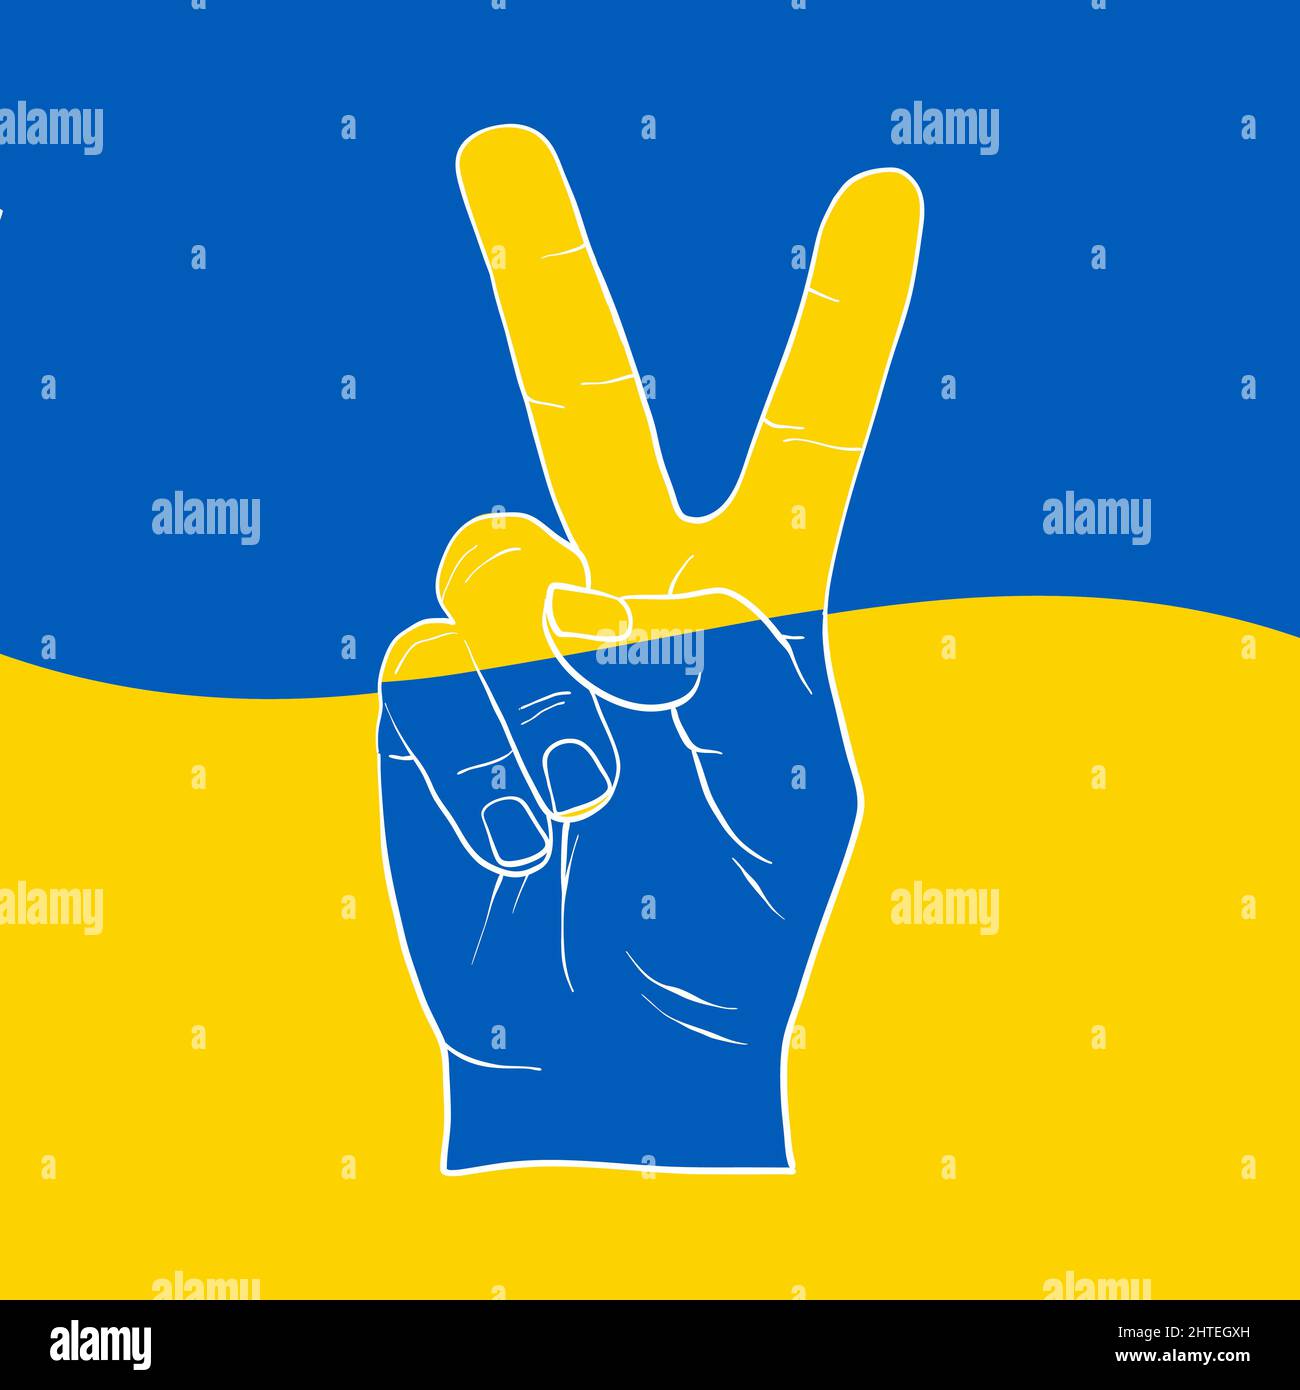 Peace hand symbol freedom for ukraine. Support icon for Kyiv and Ukraine people. Stay Strong together. Patriotic symbol, icon.-SupplementalCategories+ Stock Vector